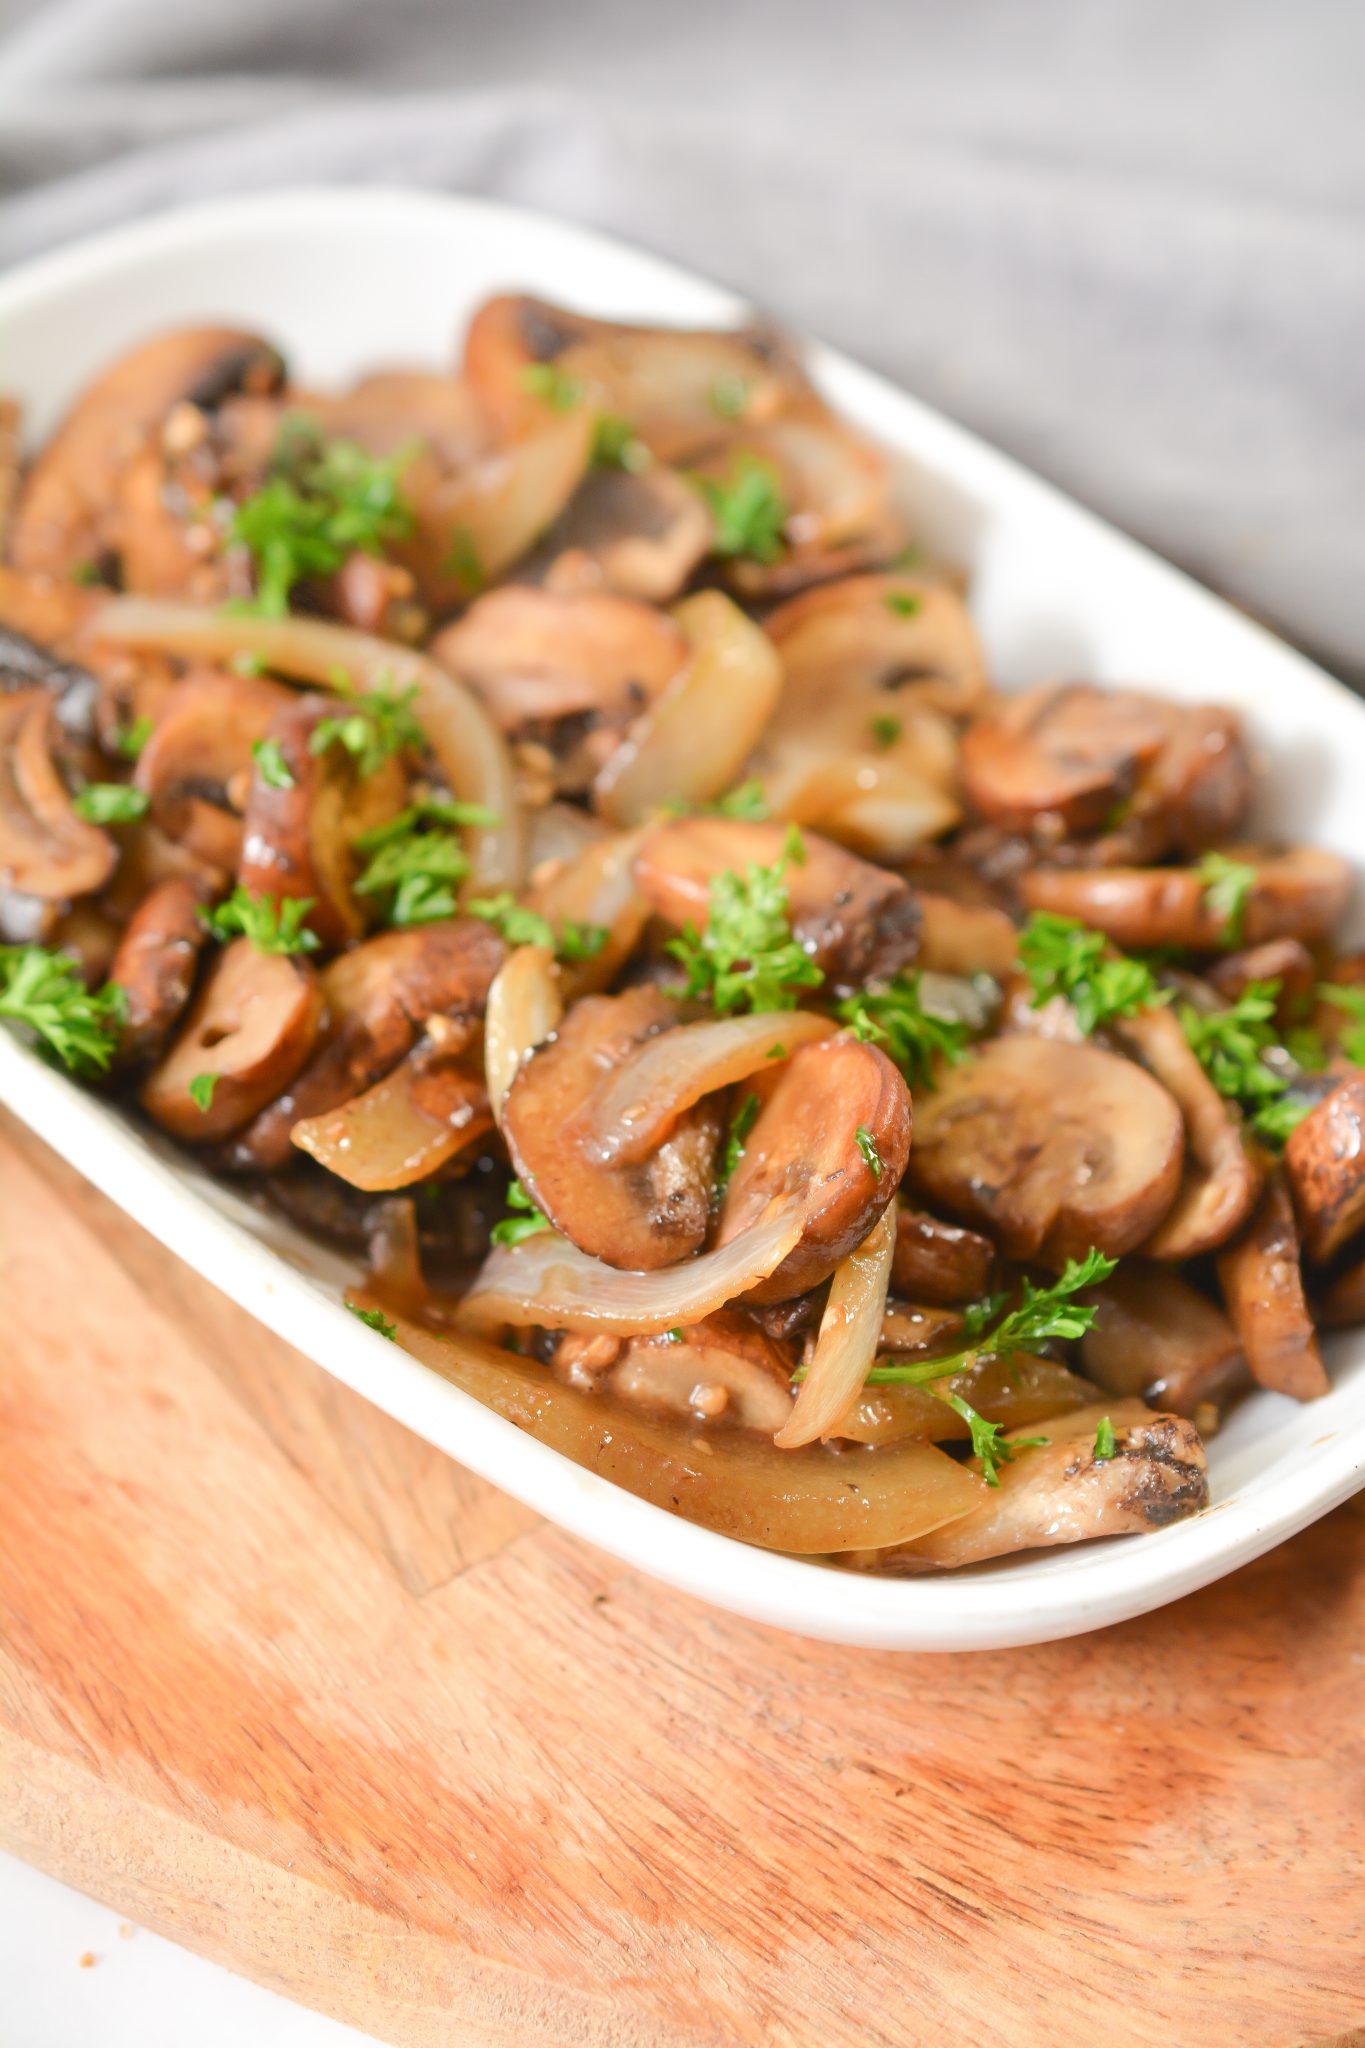 Sauteed Balsamic Mushrooms - From Gate To Plate